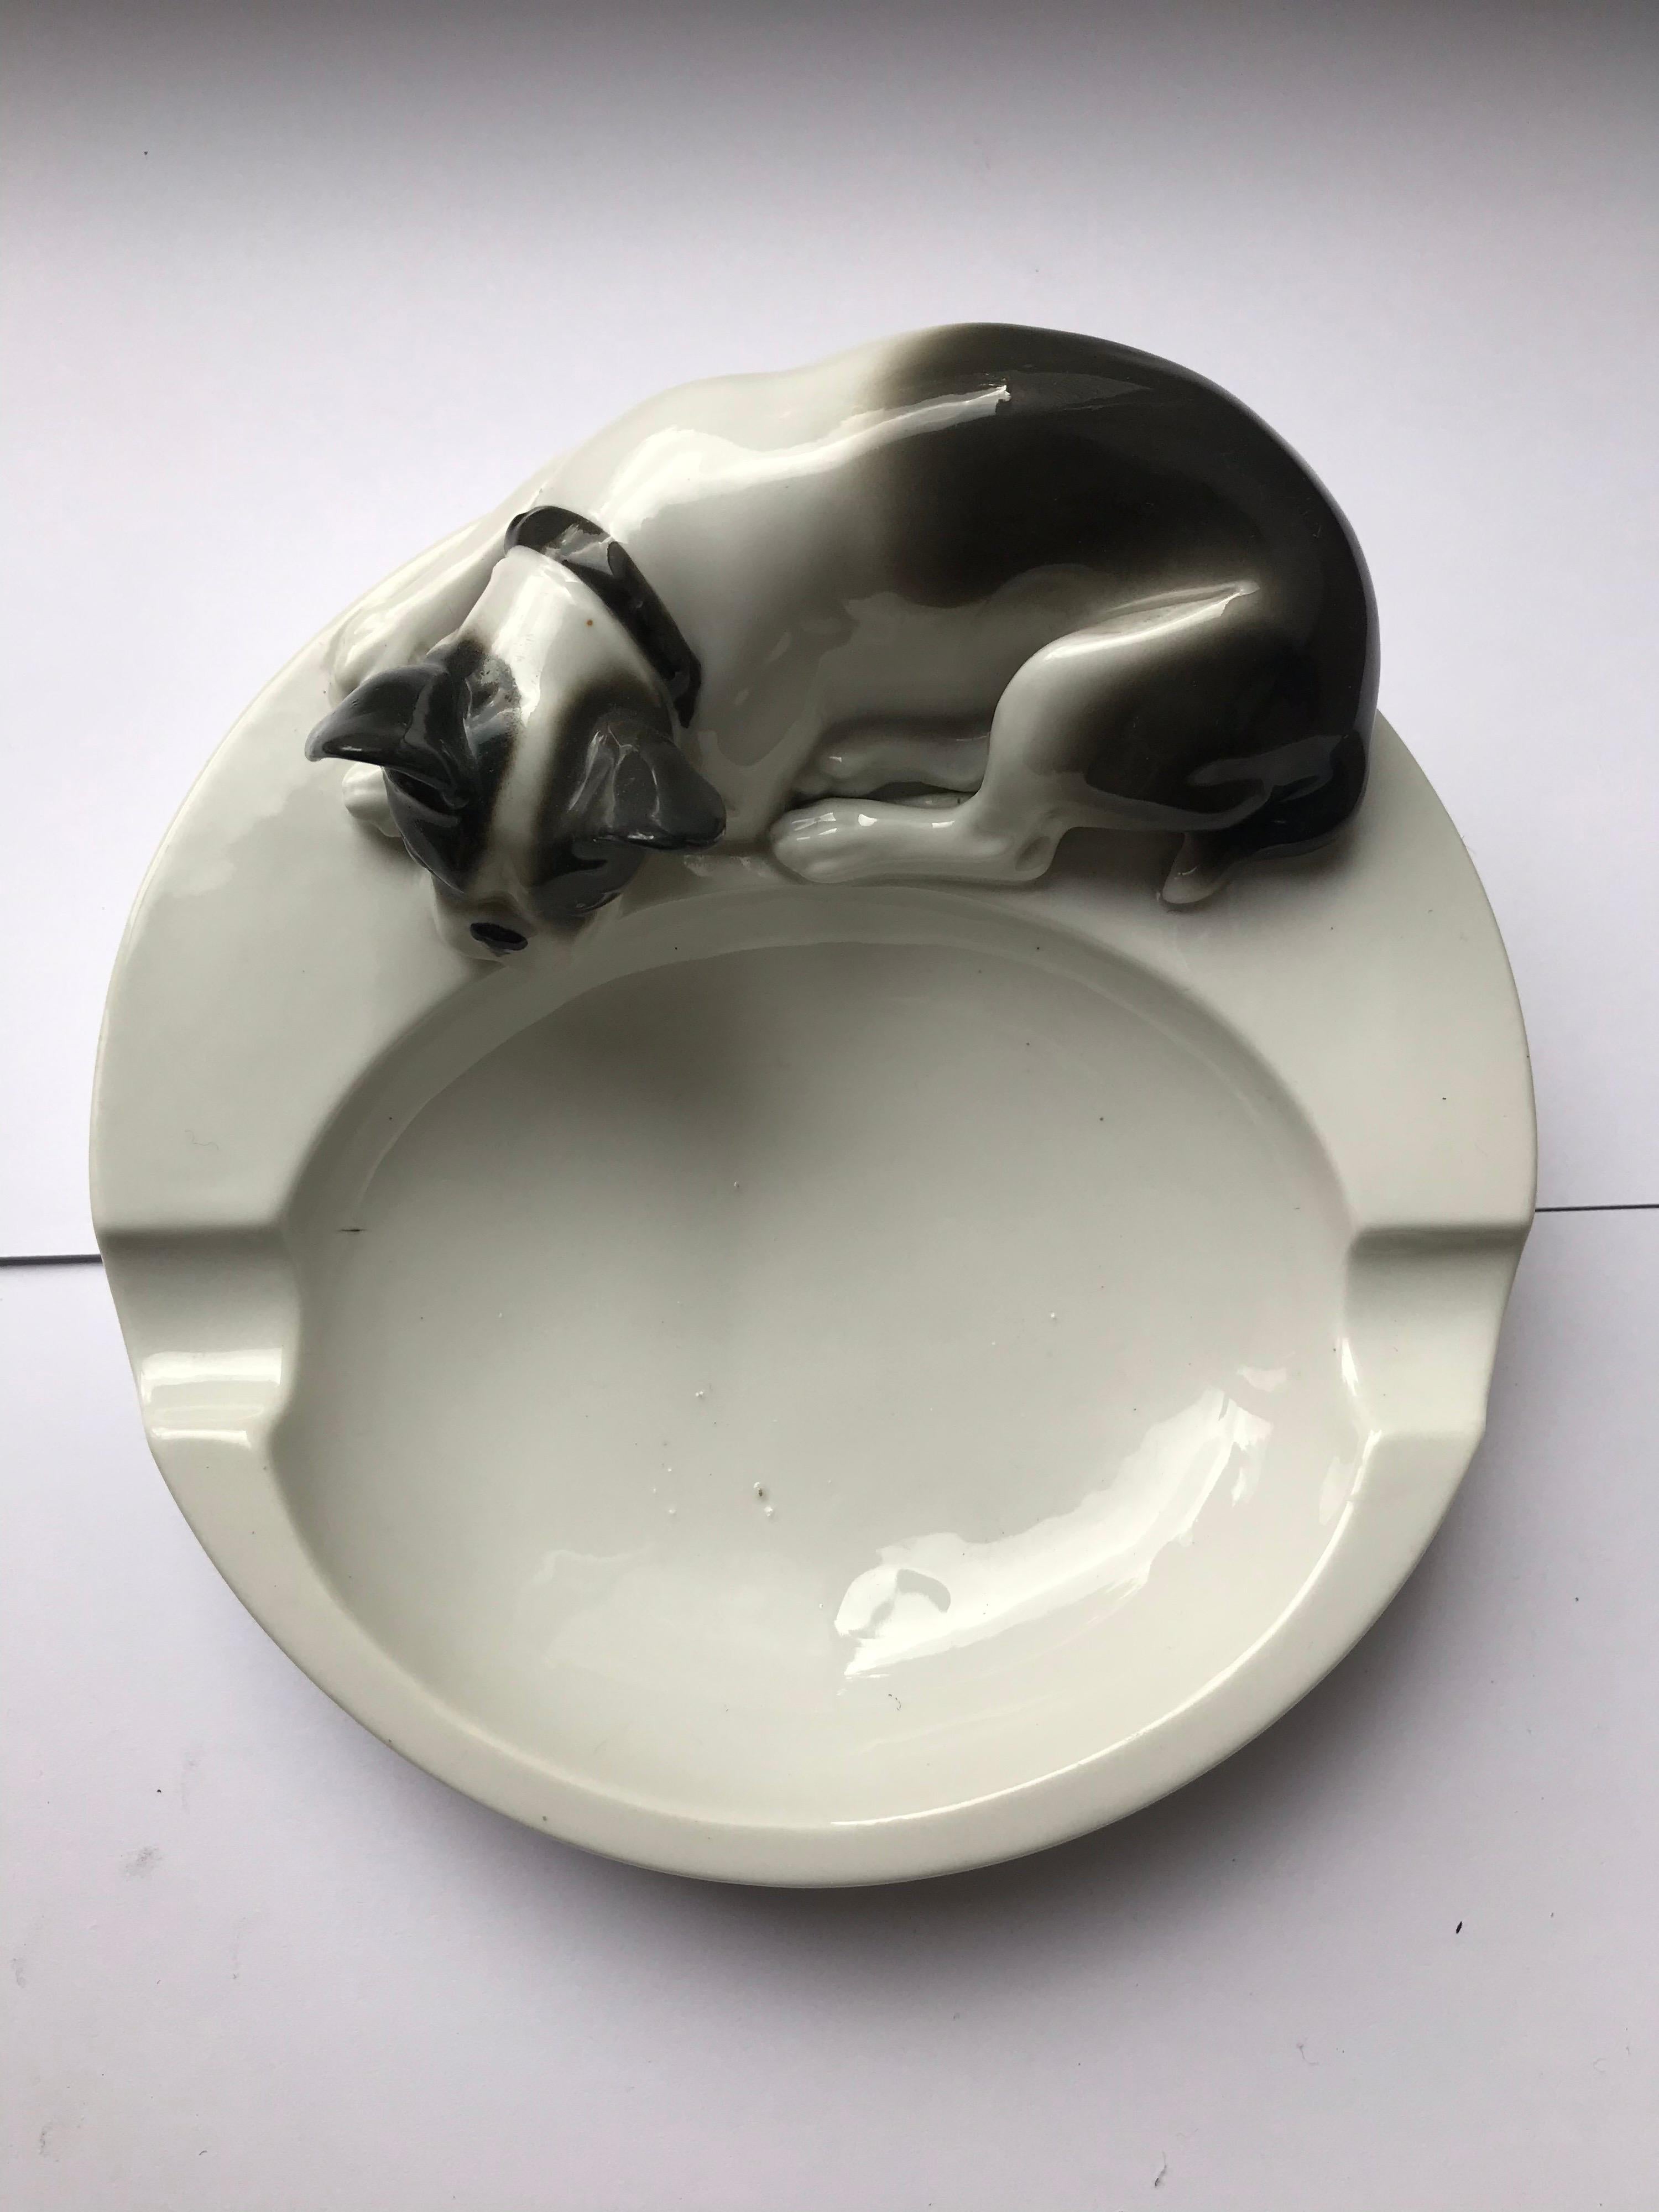 20th Century 1930s Porcelain Ashtray with French Bulldog by Pfeffer Gotha , Germany  For Sale